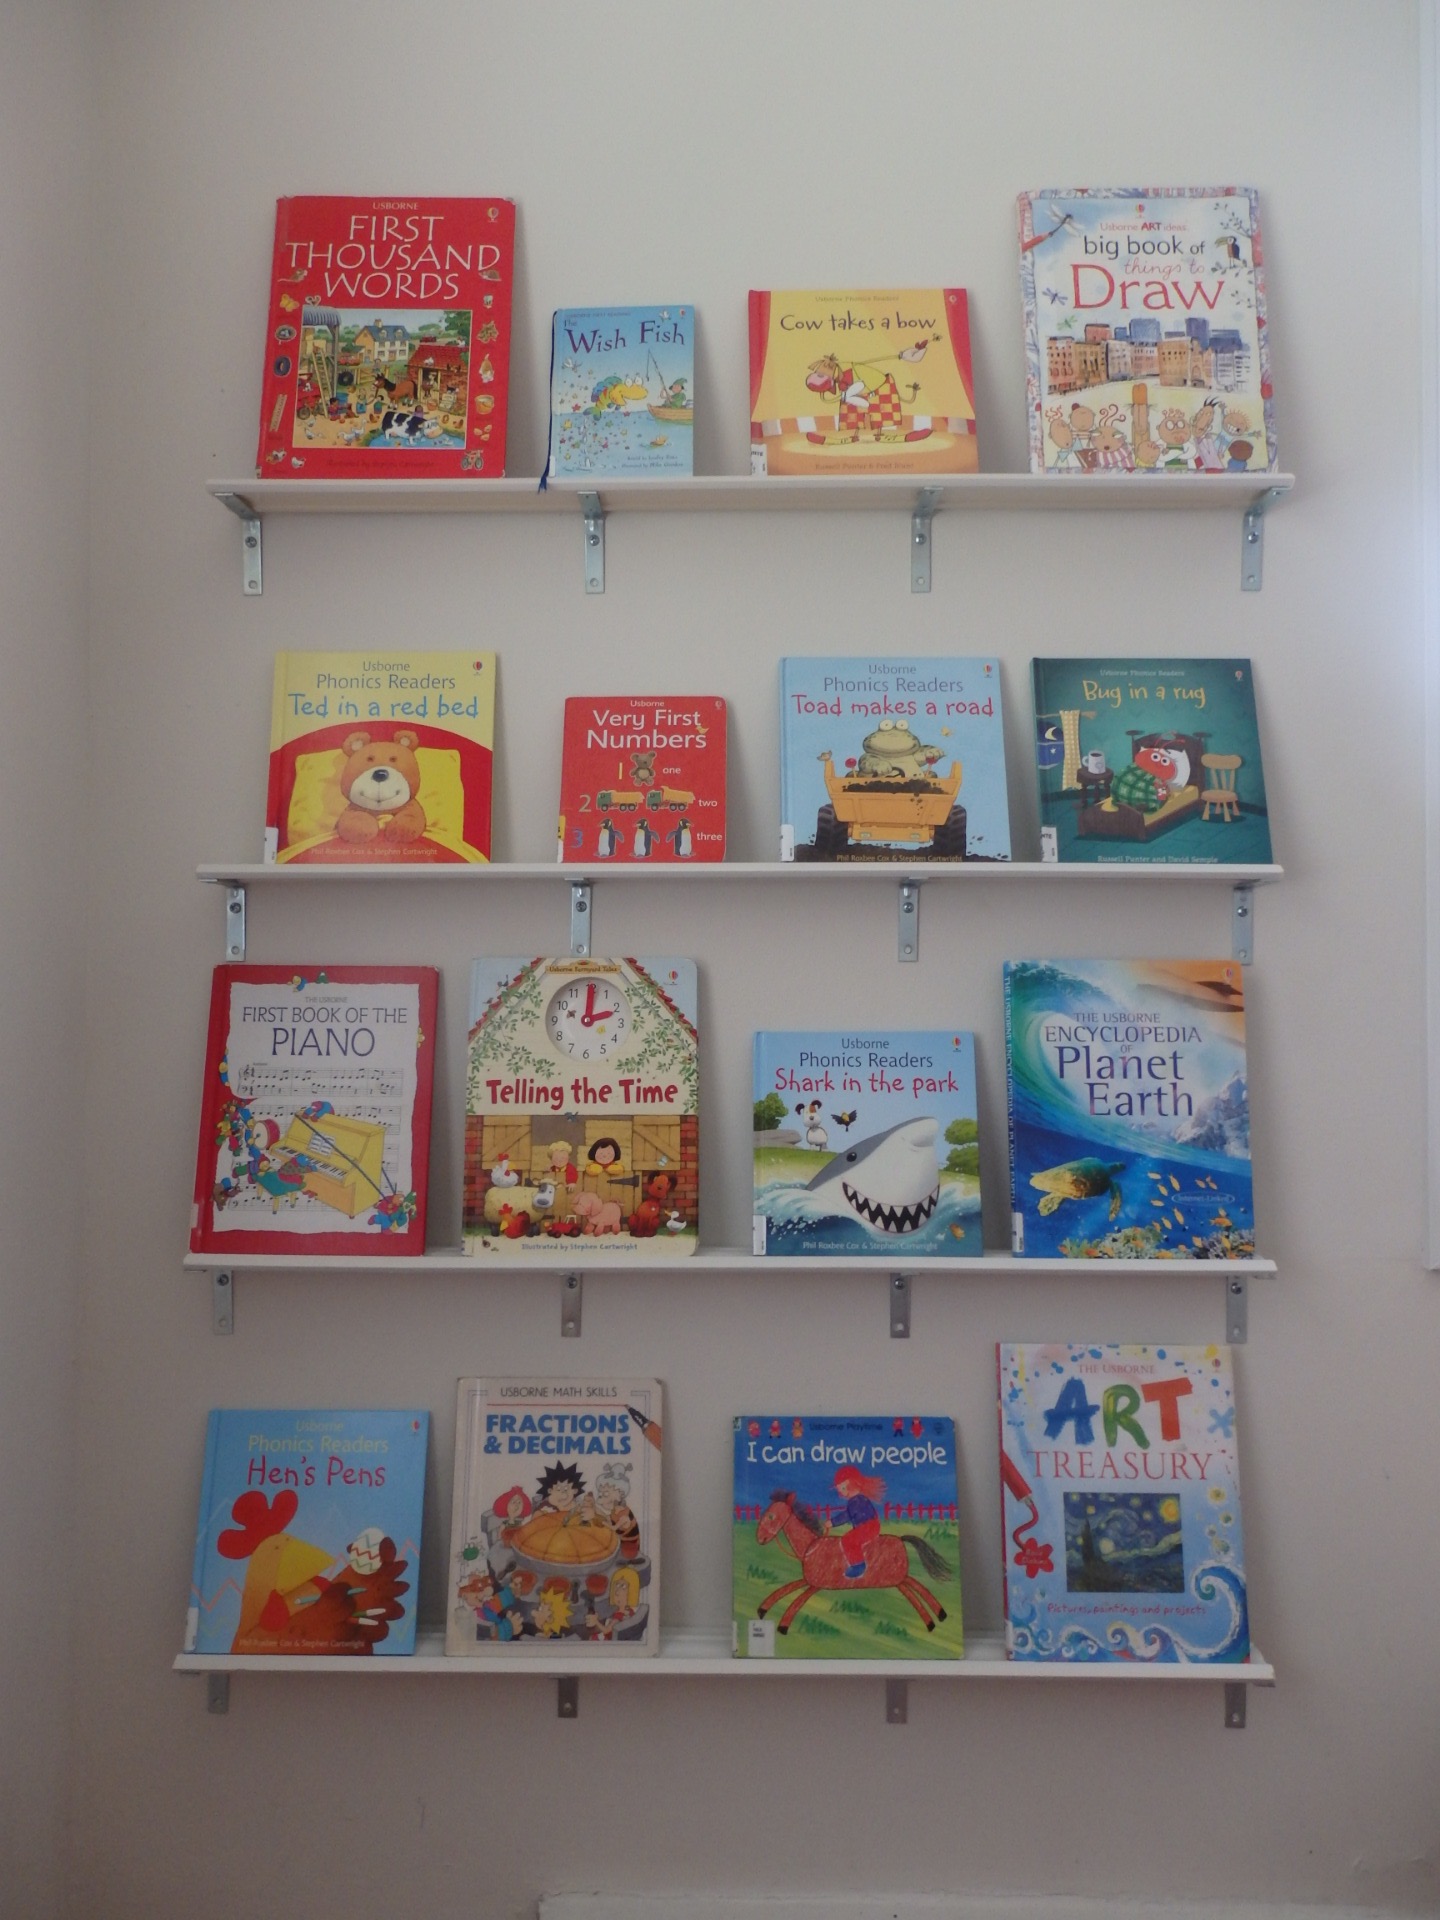 Usborne Books at our house